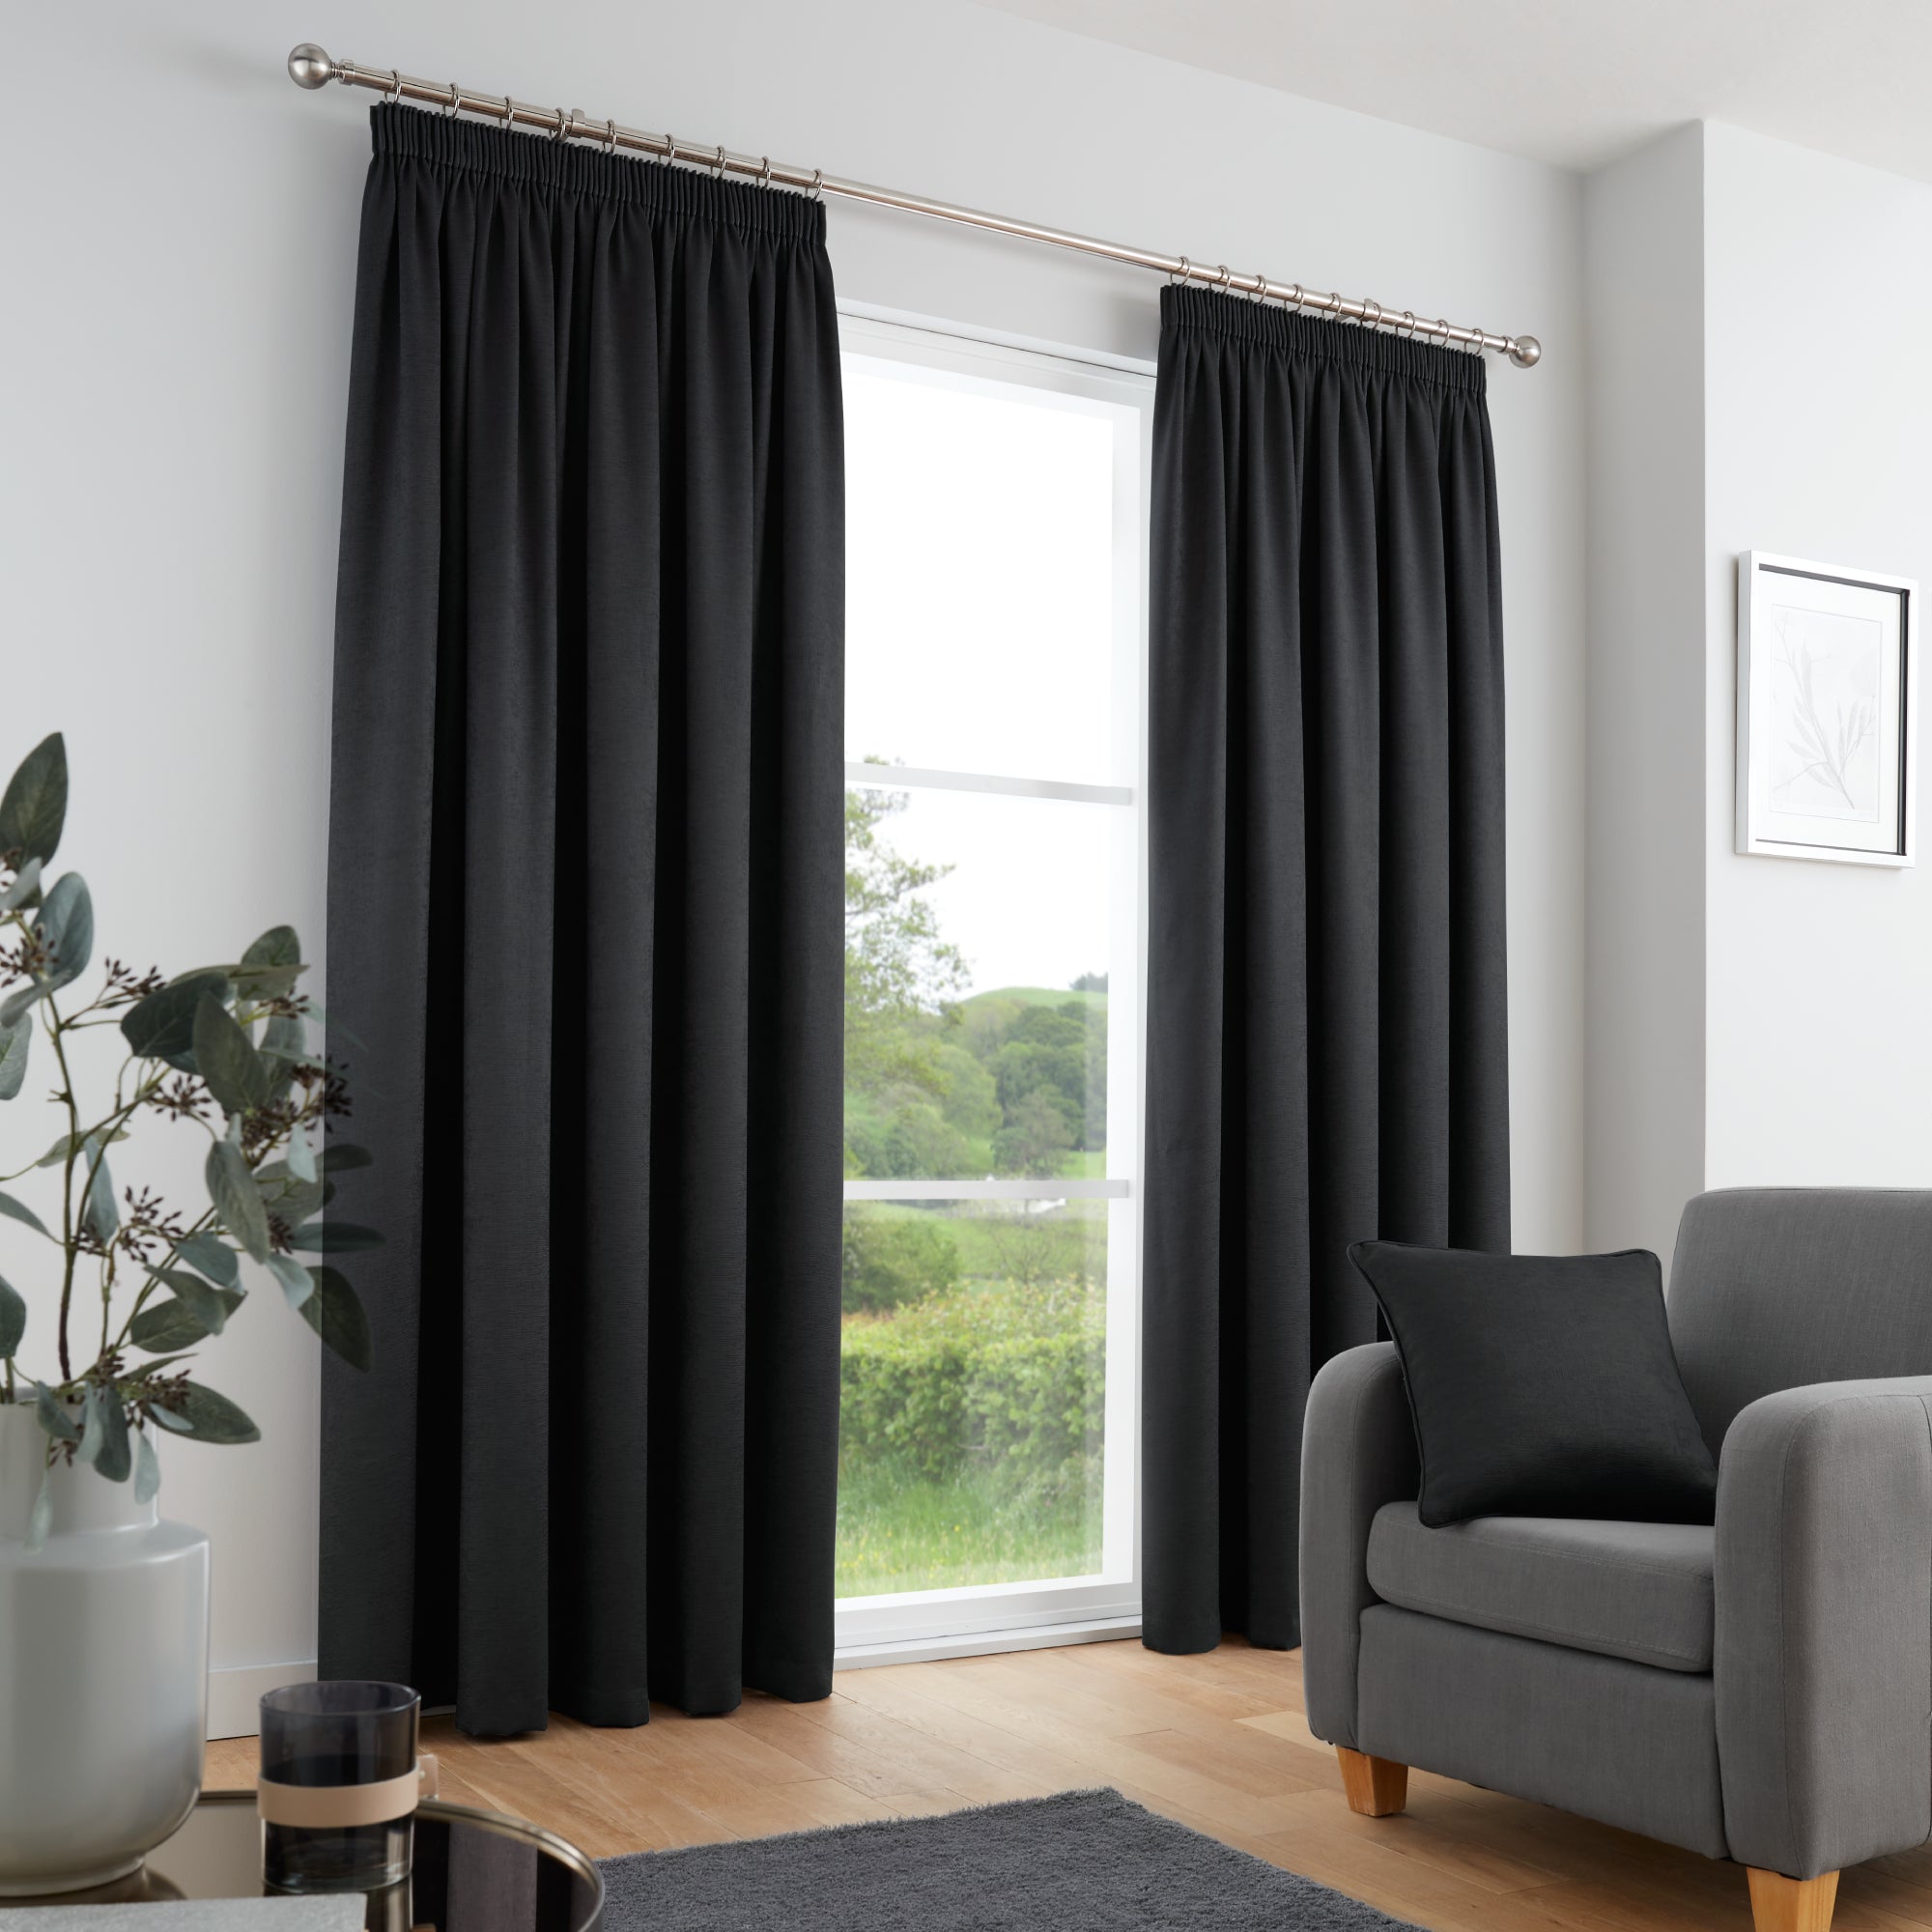 Pair of Pencil Pleat Curtains Galaxy by Fusion in Black